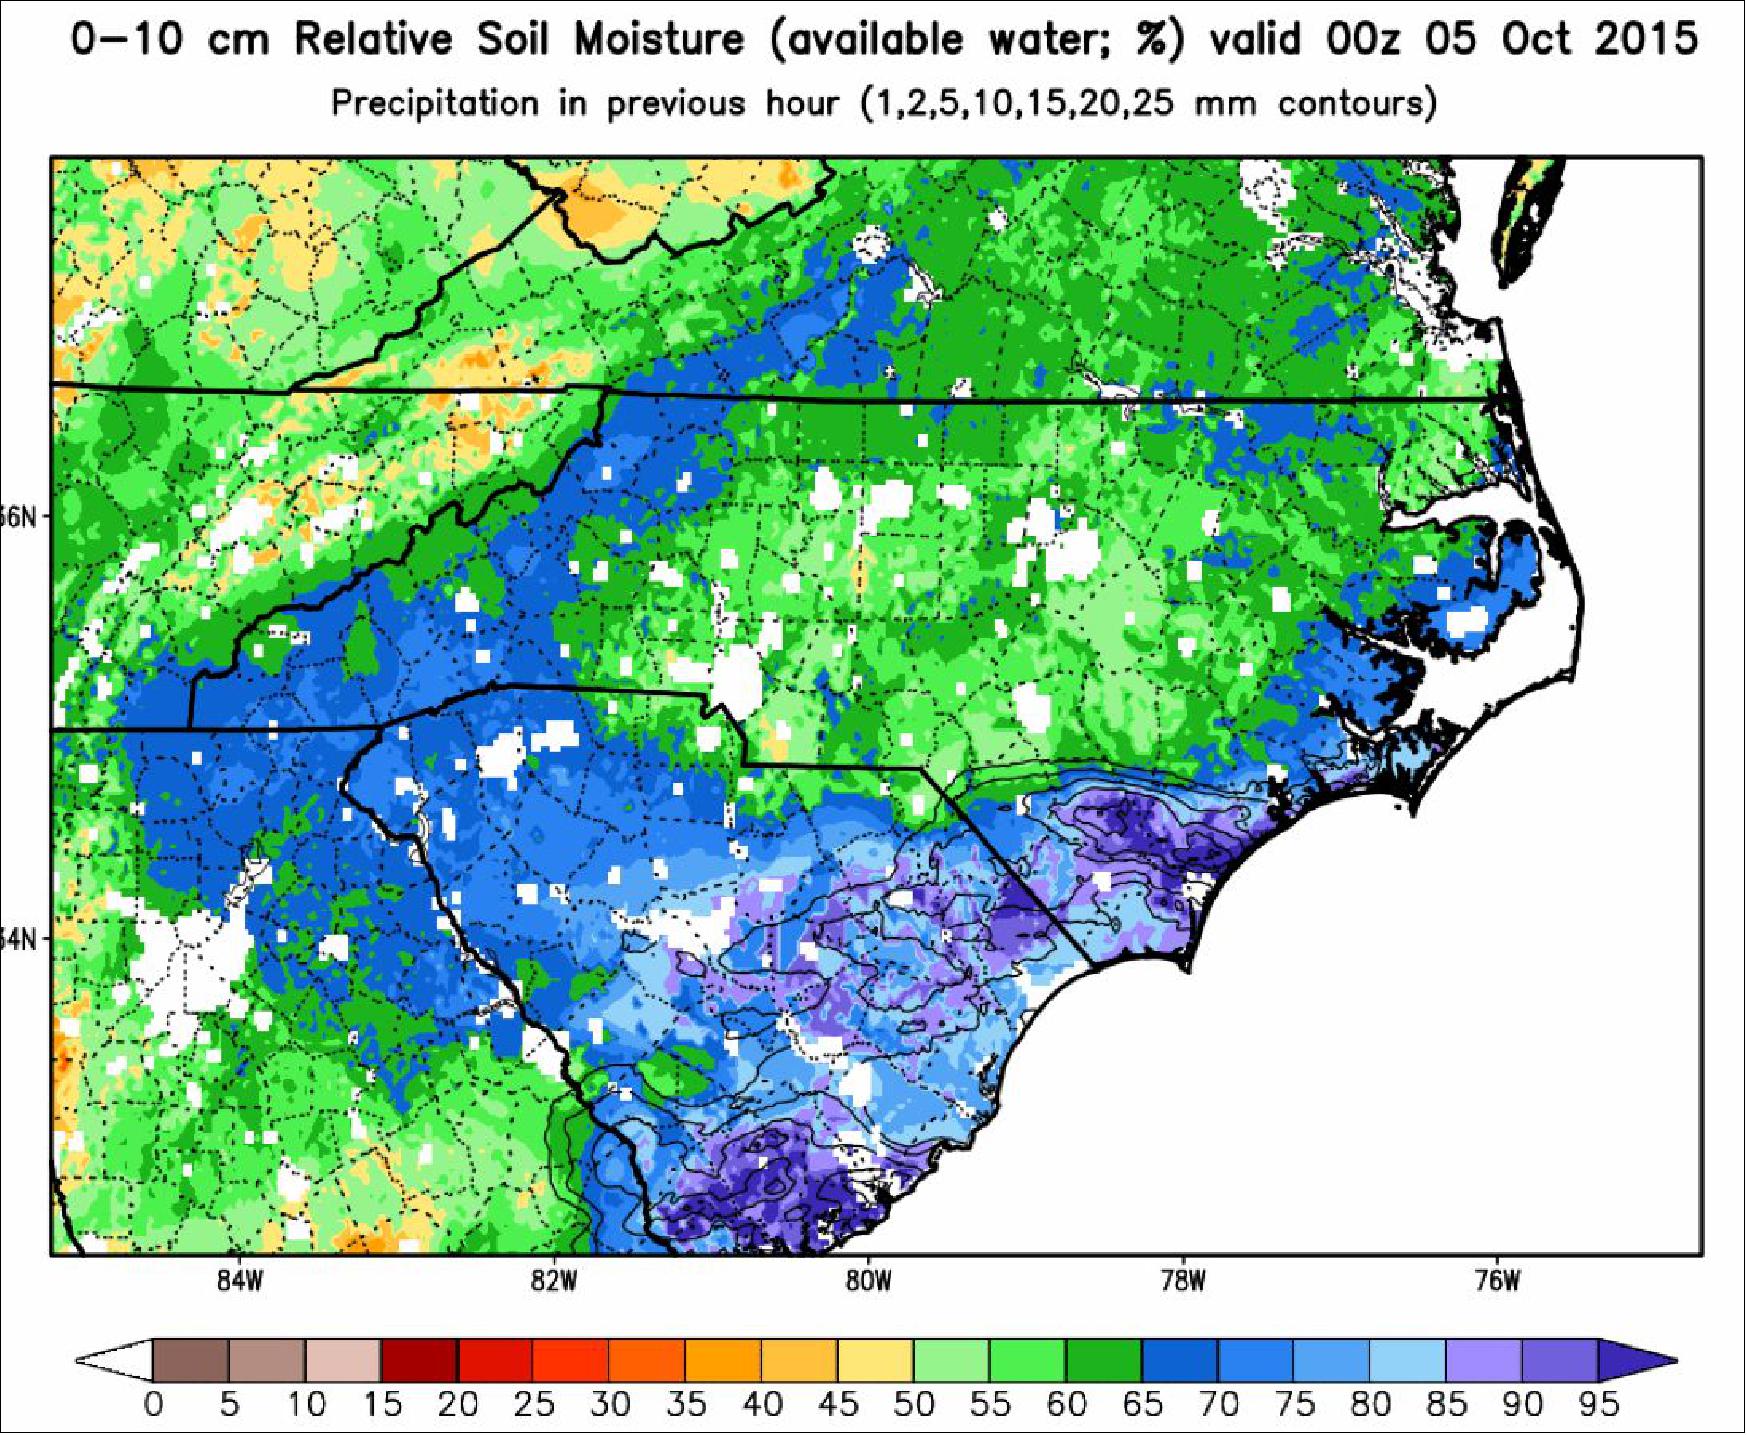 Figure 37: Relative soil moisture over the Carolinas on Oct. 5, 2015, shown in percent. Green indicates the soils are 50 to 65% saturated, while blues and purples indicate 65 to 100% saturated. Saturated soils can hold no more water so those areas will flood (image credit: NASA/MSFC)